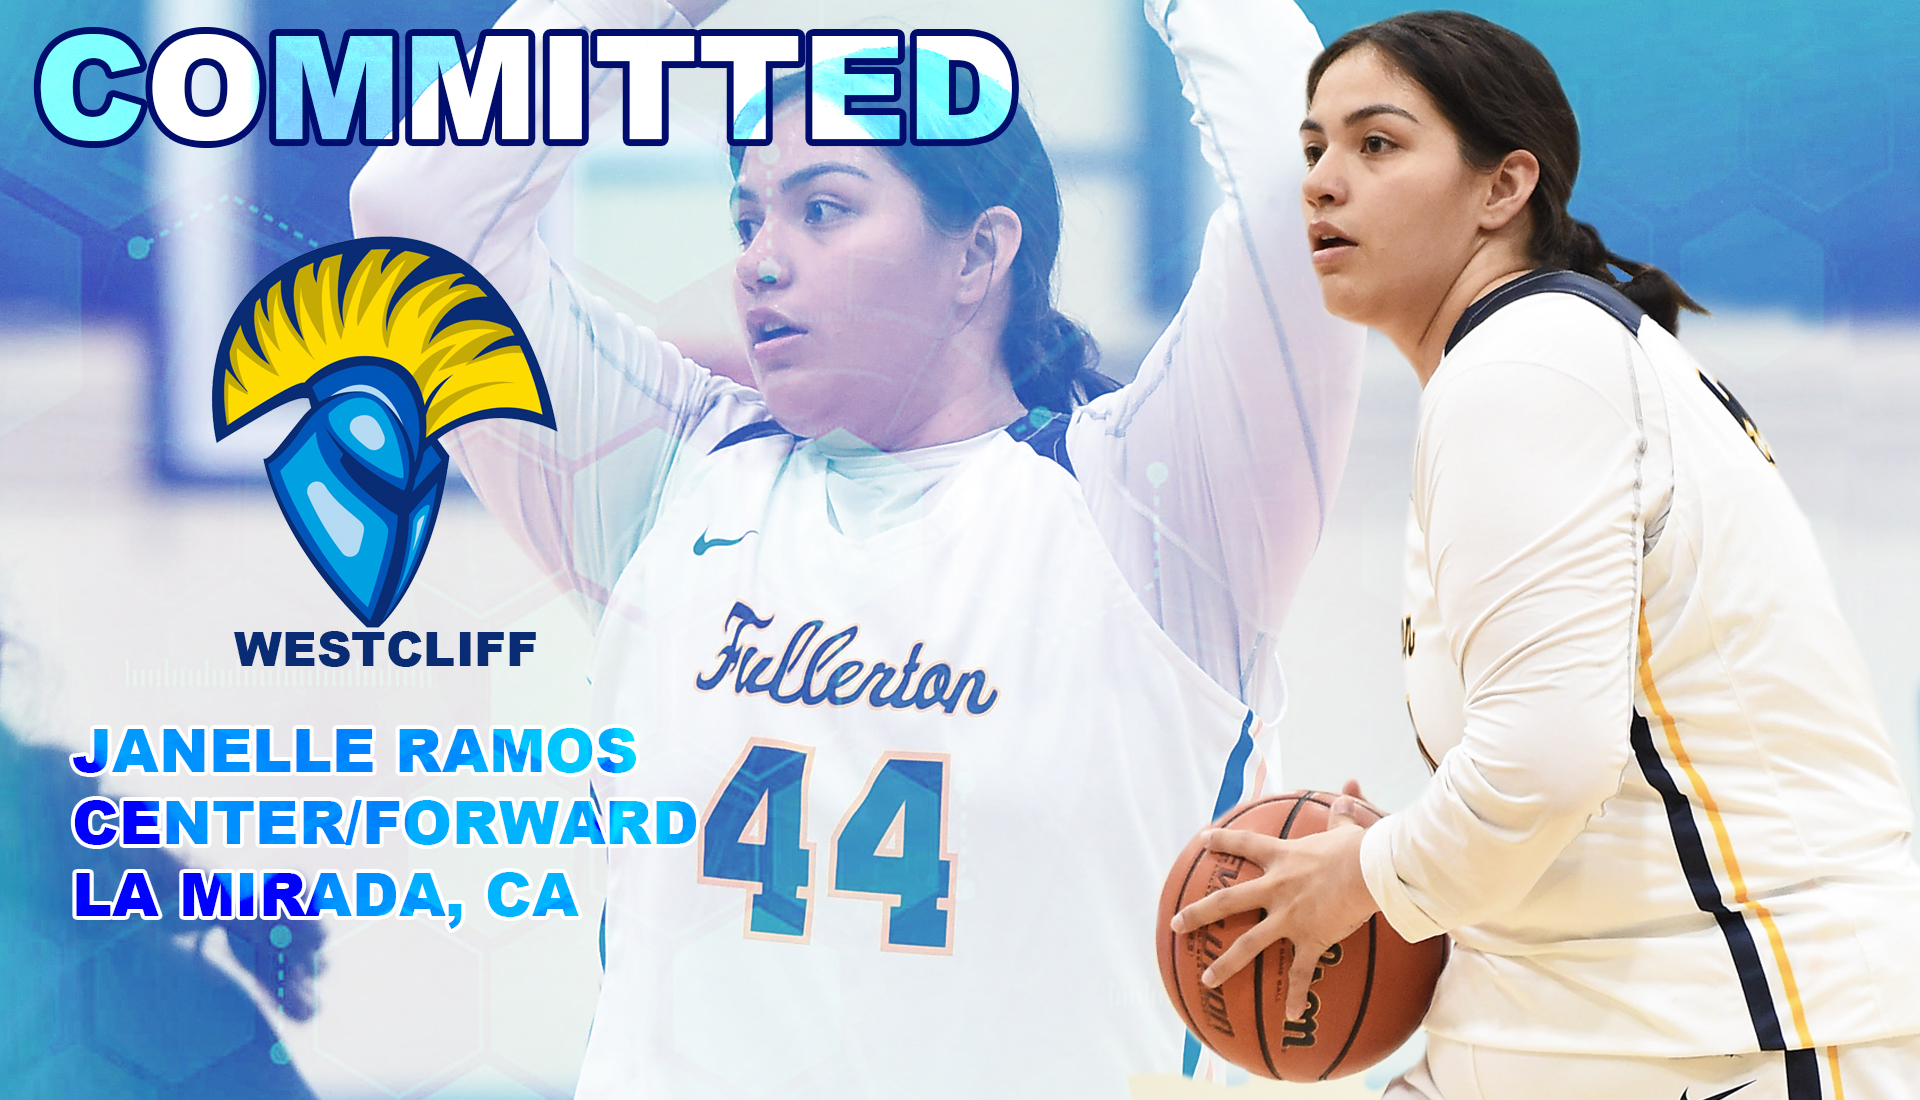 RAMOS COMMITS TO WESTCLIFF